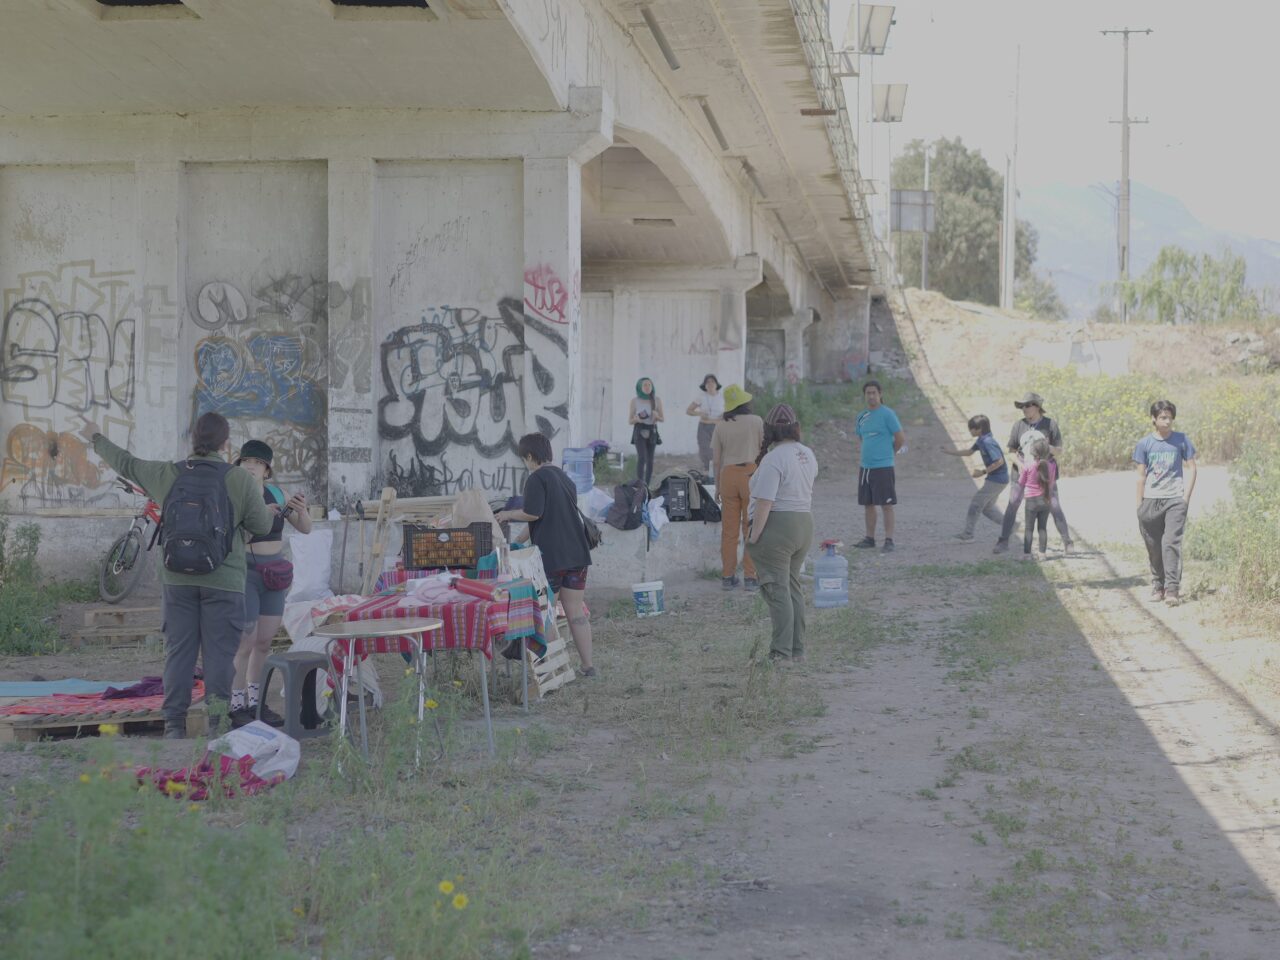 A group of people standing under a bridge